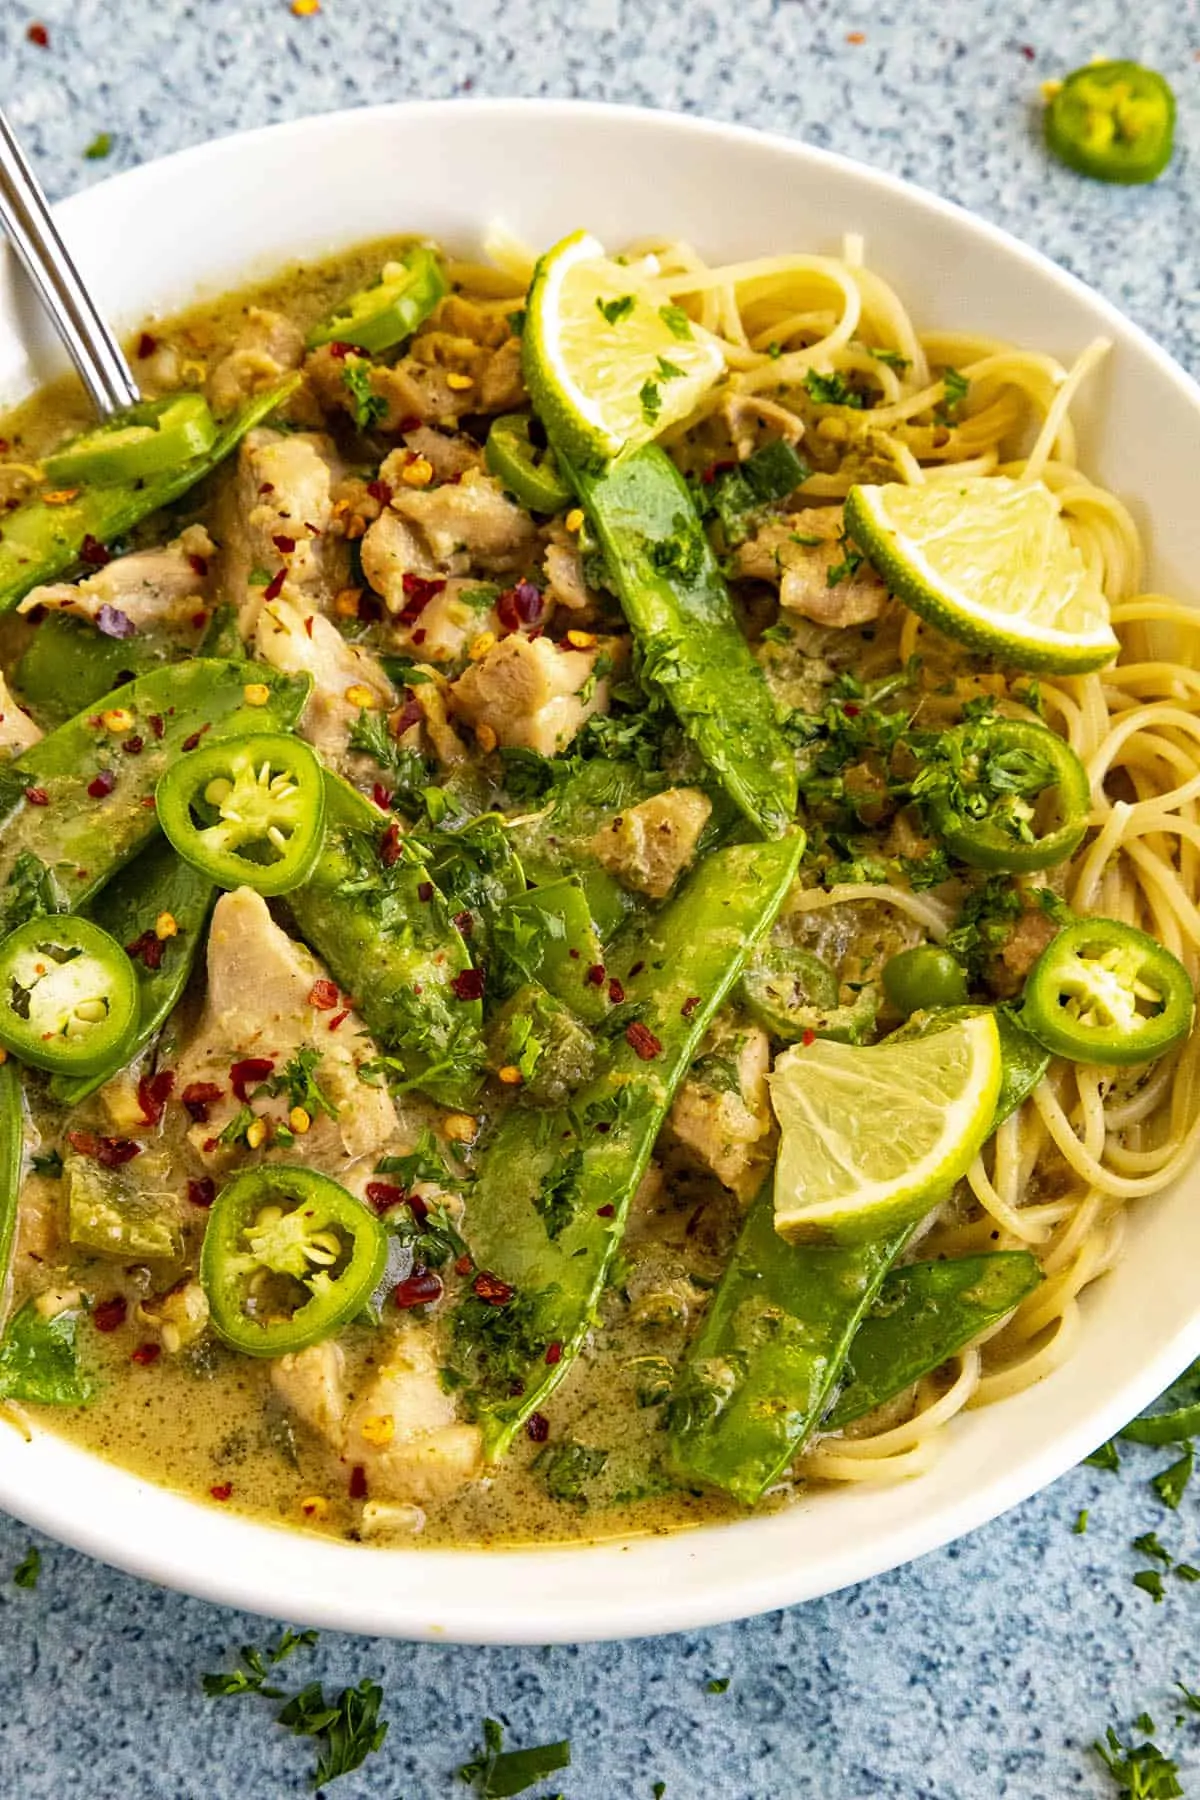 Spicy green curry in a bowl